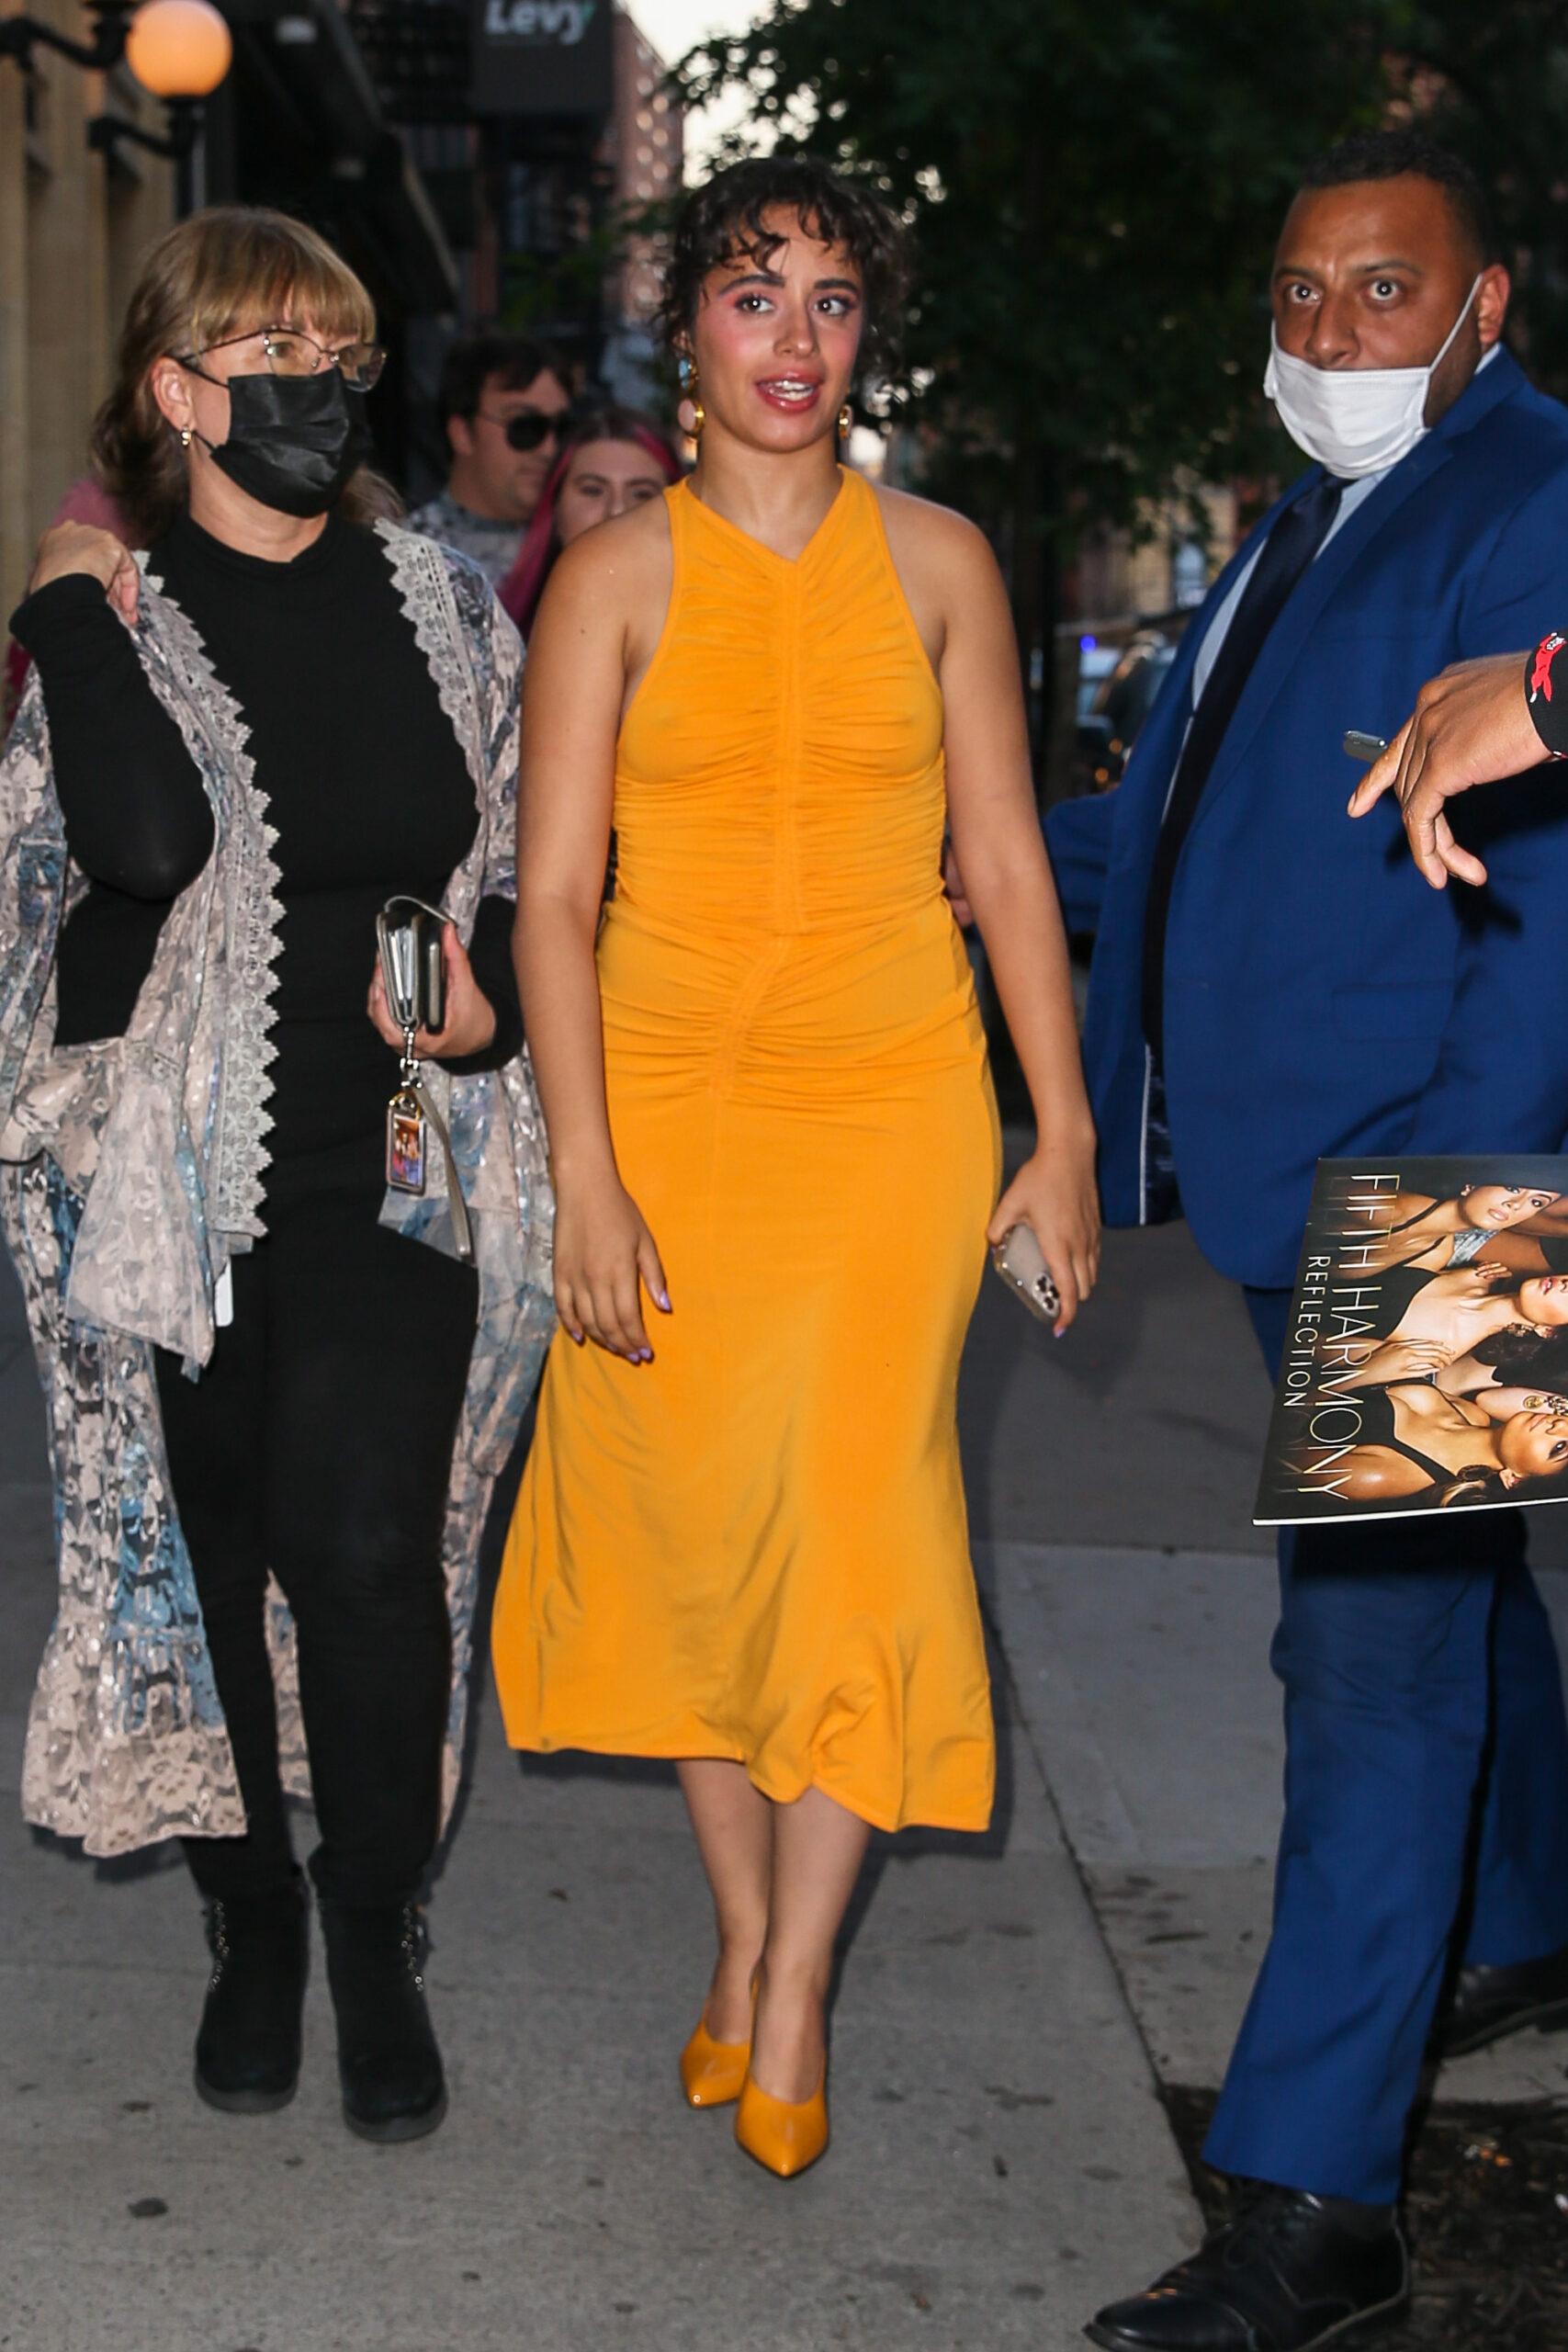 Camila Cabello wore a yellow dress while out and about in New York City